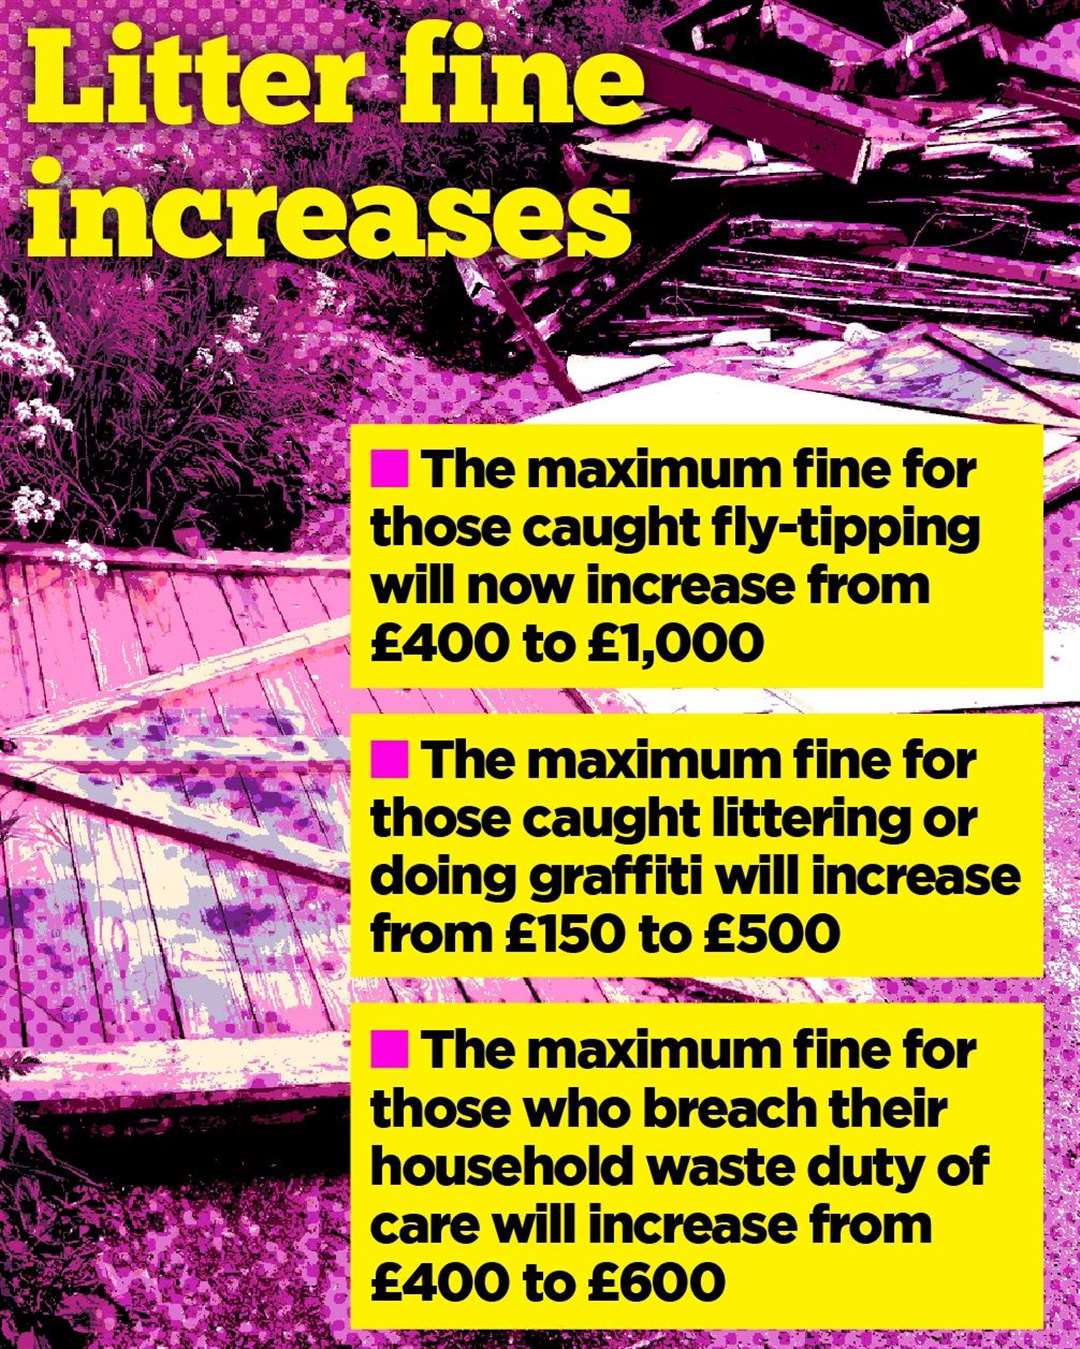 Ministers are unveiling new maximum fines for littering